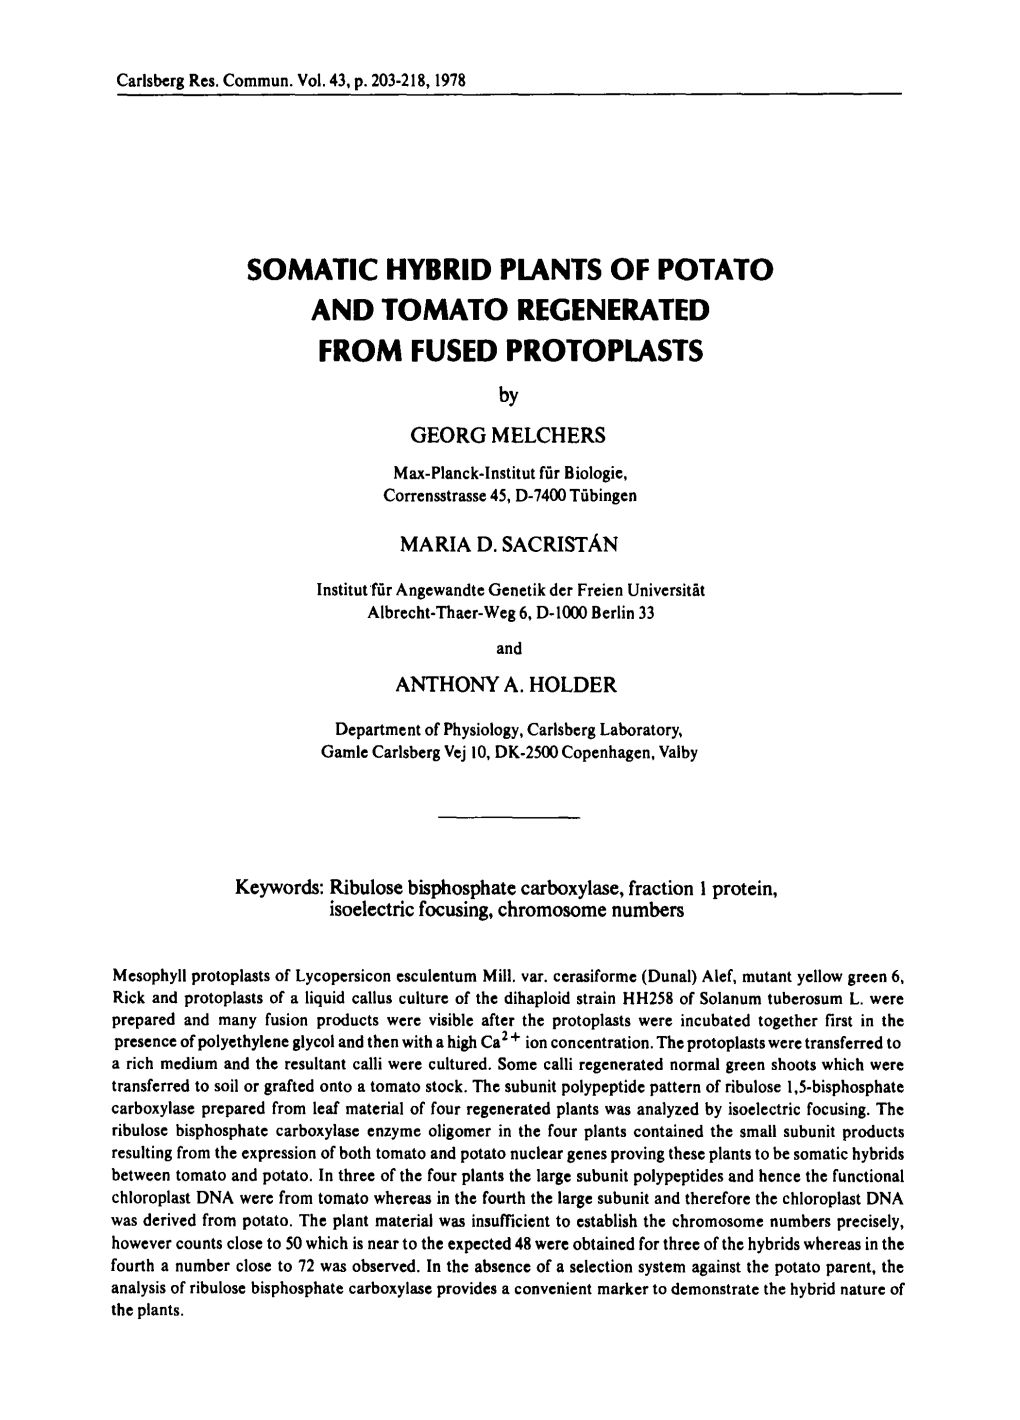 SOMATIC HYBRID PLANTS of POTATO and TOMATO REGENERATED from FUSED PROTOPLASTS by GEORG MELCHERS